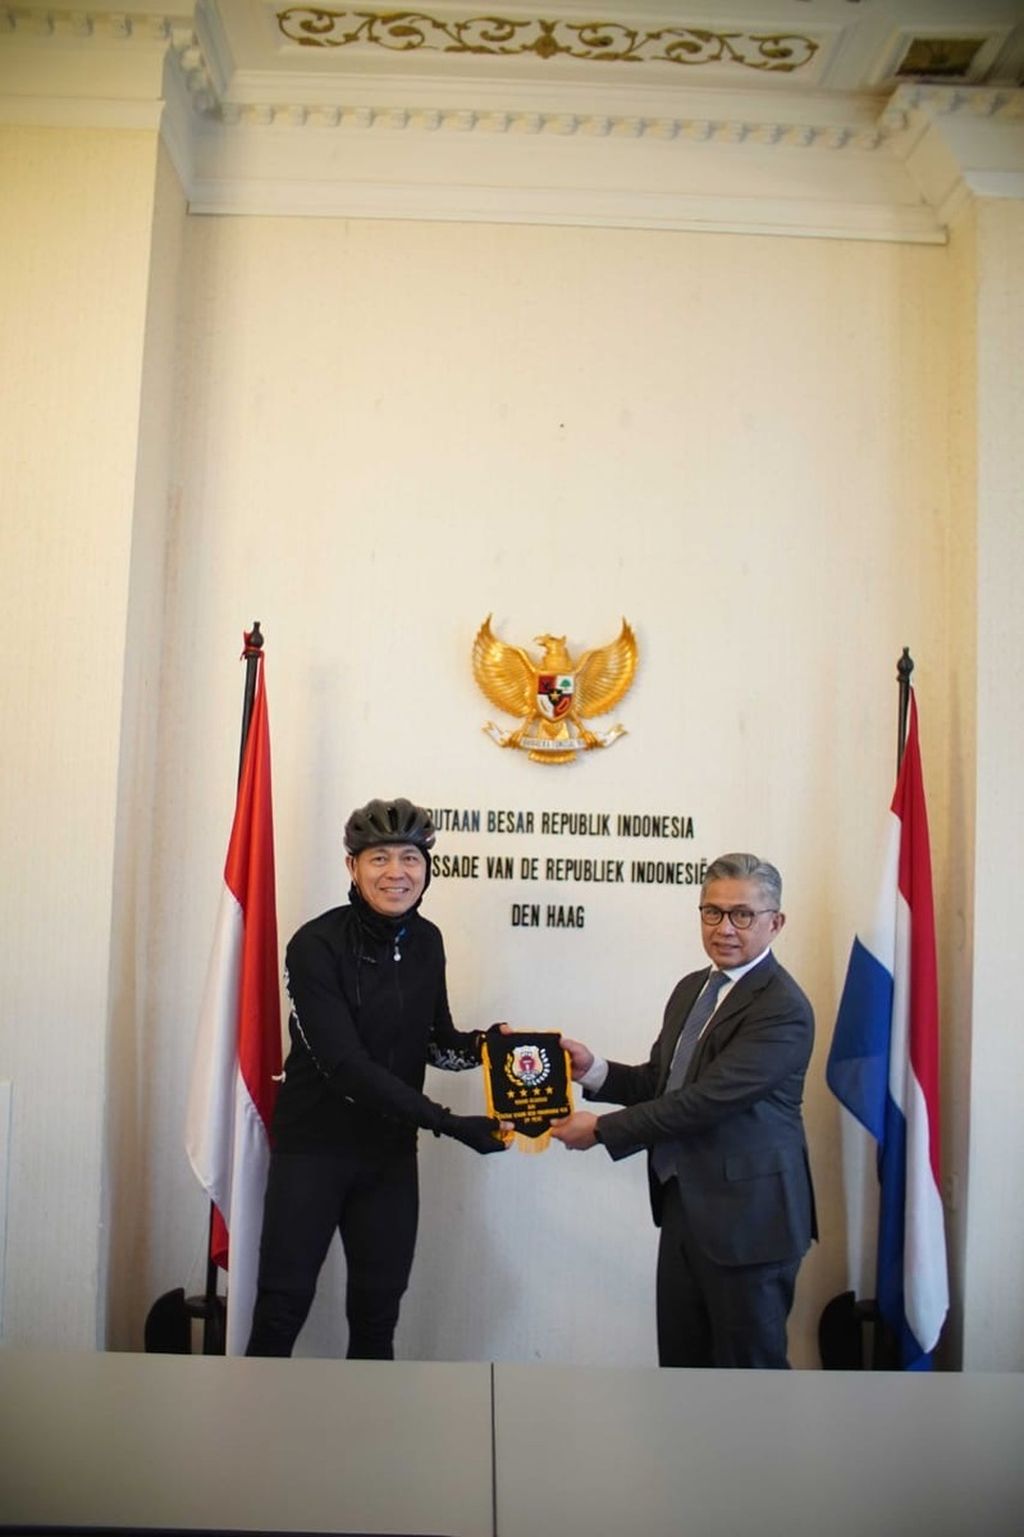 Royke met with the Indonesian Ambassador to the Kingdom of the Netherlands at Den Haag Mayerfas.